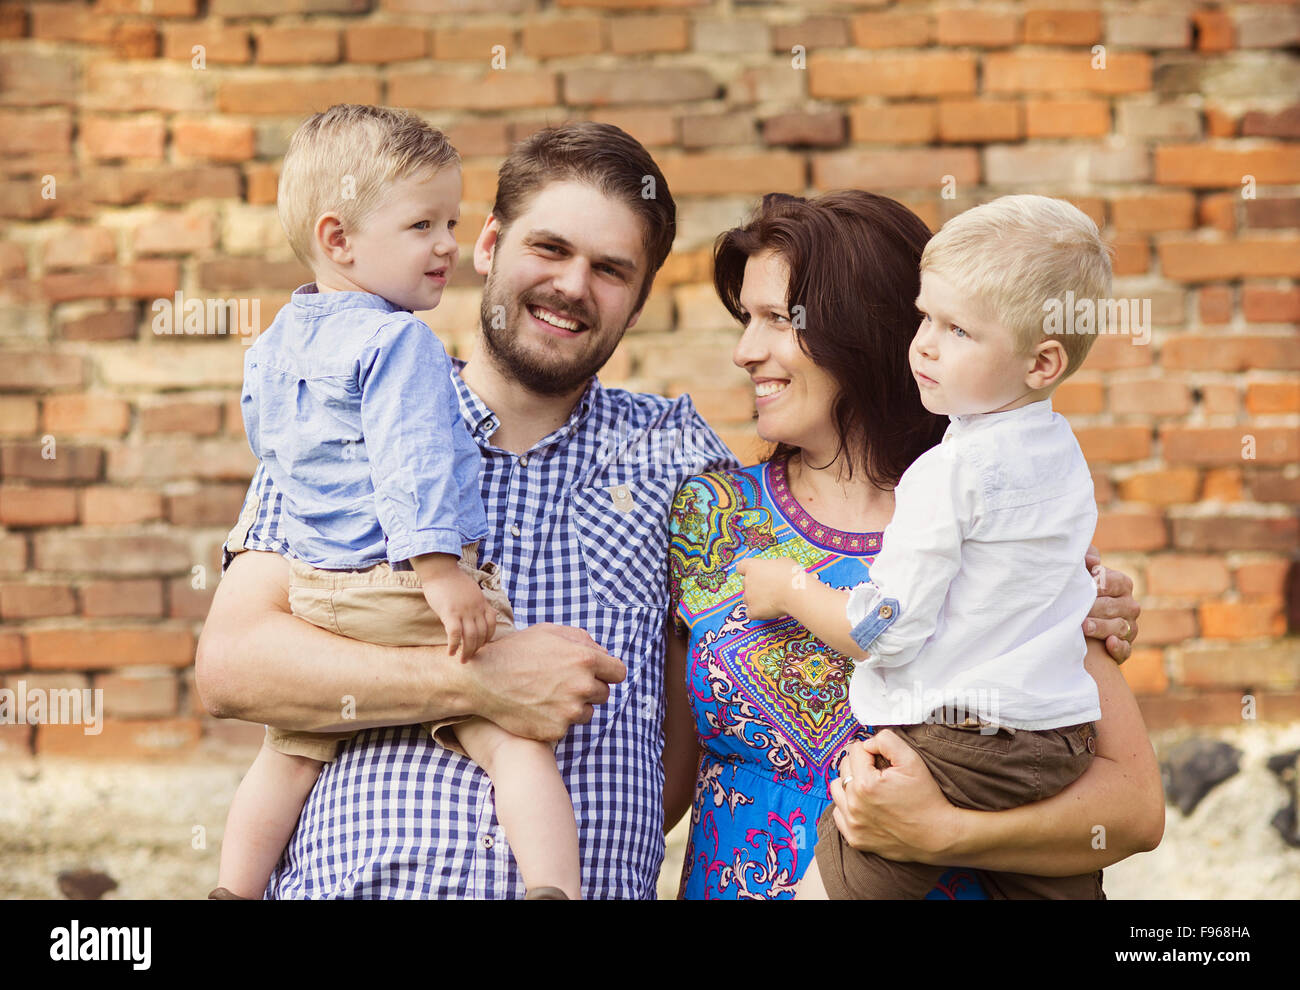 Happy young family have fun together in nature by the old brick house Stock Photo